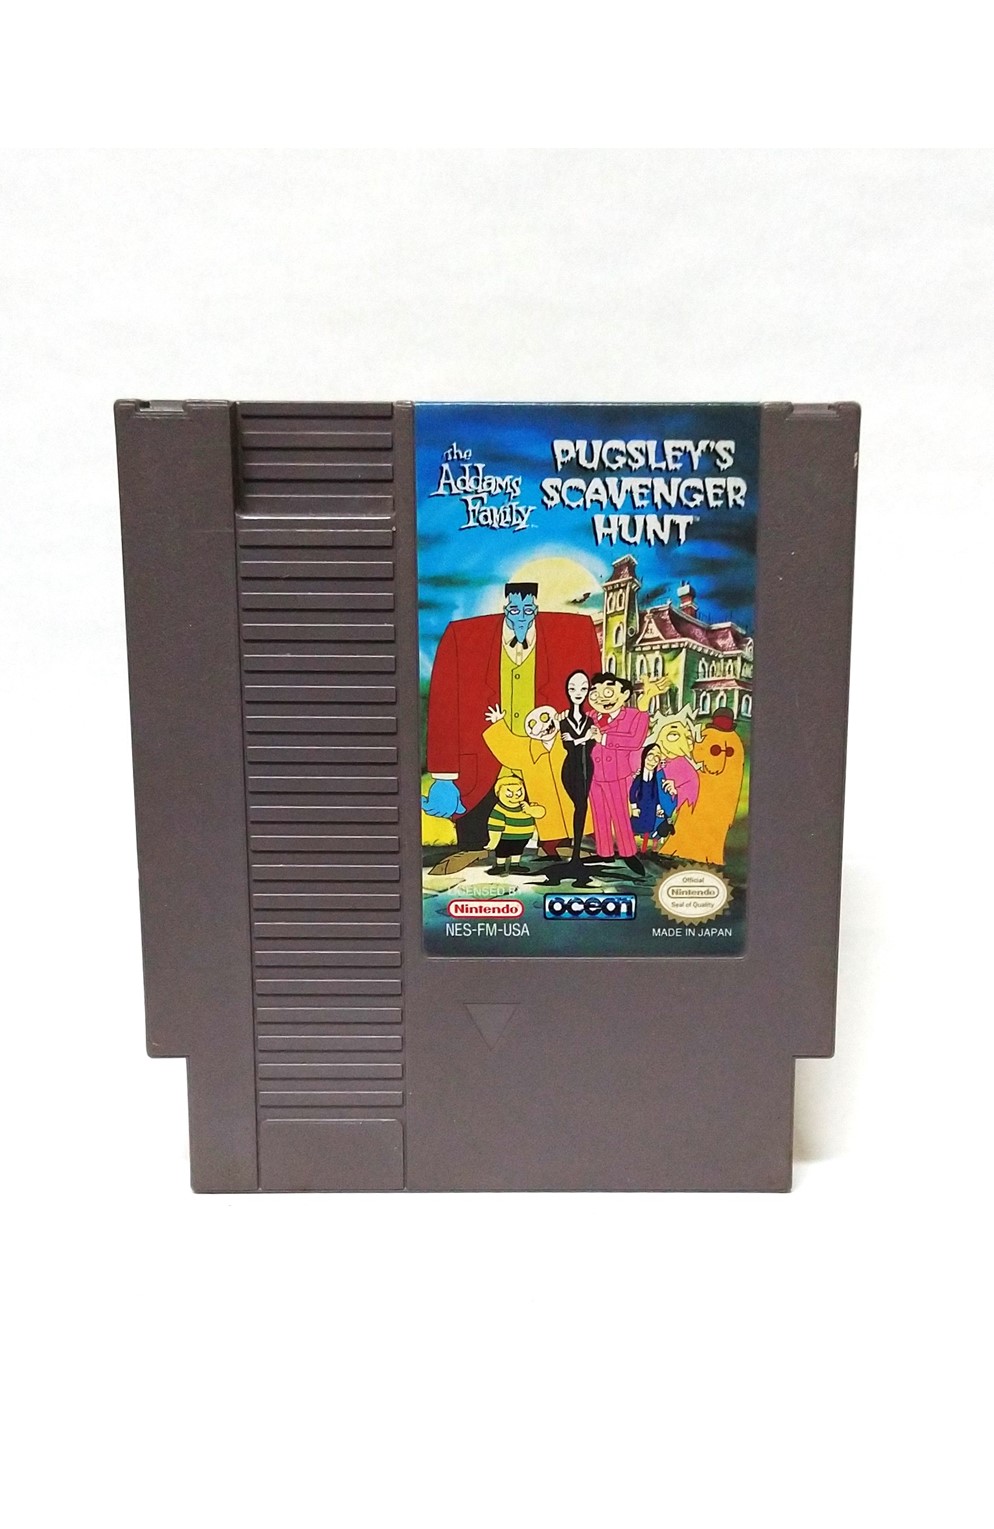 Nintendo Nes The Addam's Family Pugsley's Scavenger Hunt Cartridge Only (Excellent)